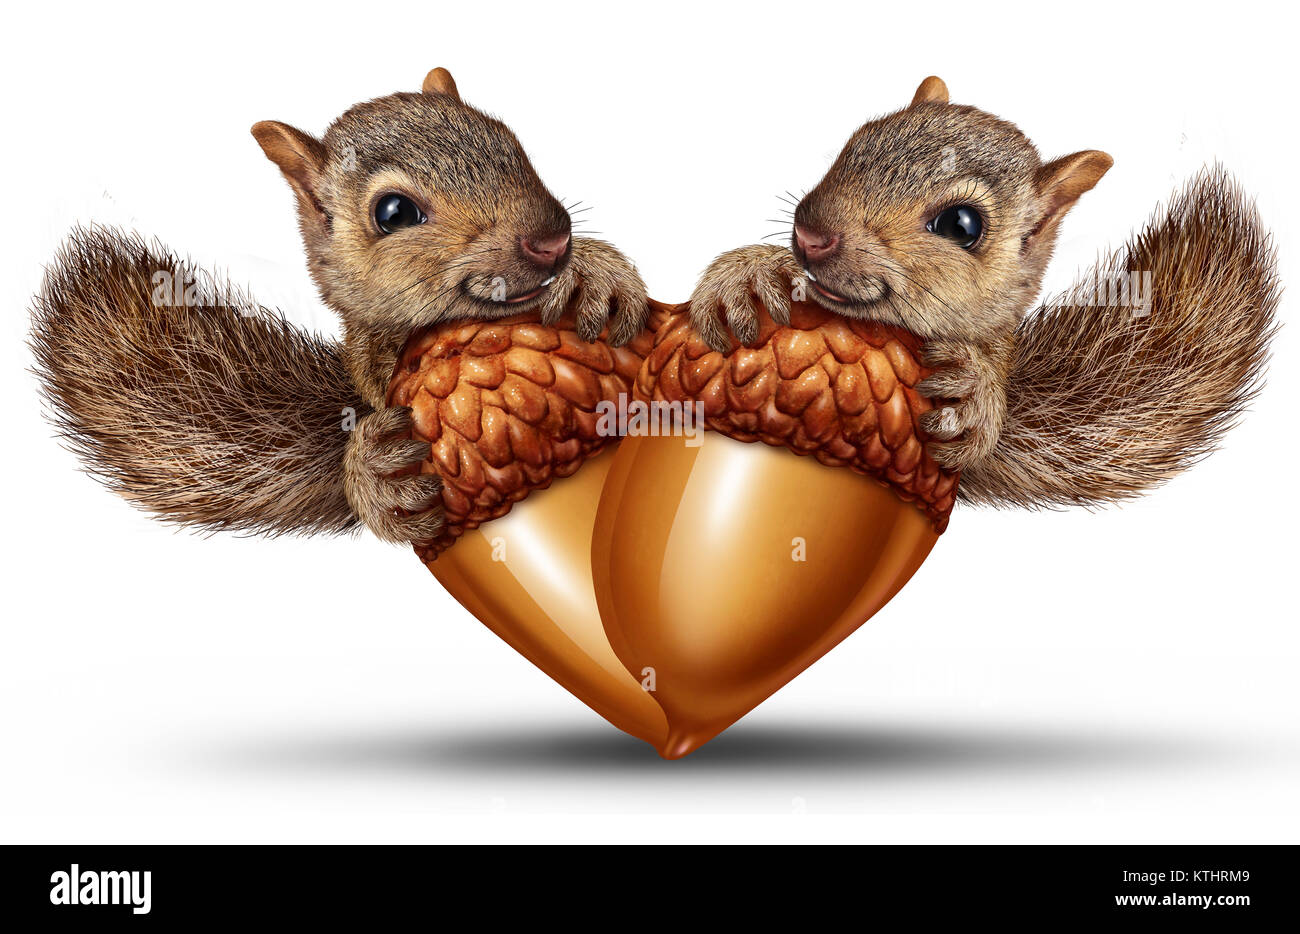 Cute animals in love as two adorable squirrels together with acorns shaped as a heart as a valentine or loving relationship symbol. Stock Photo